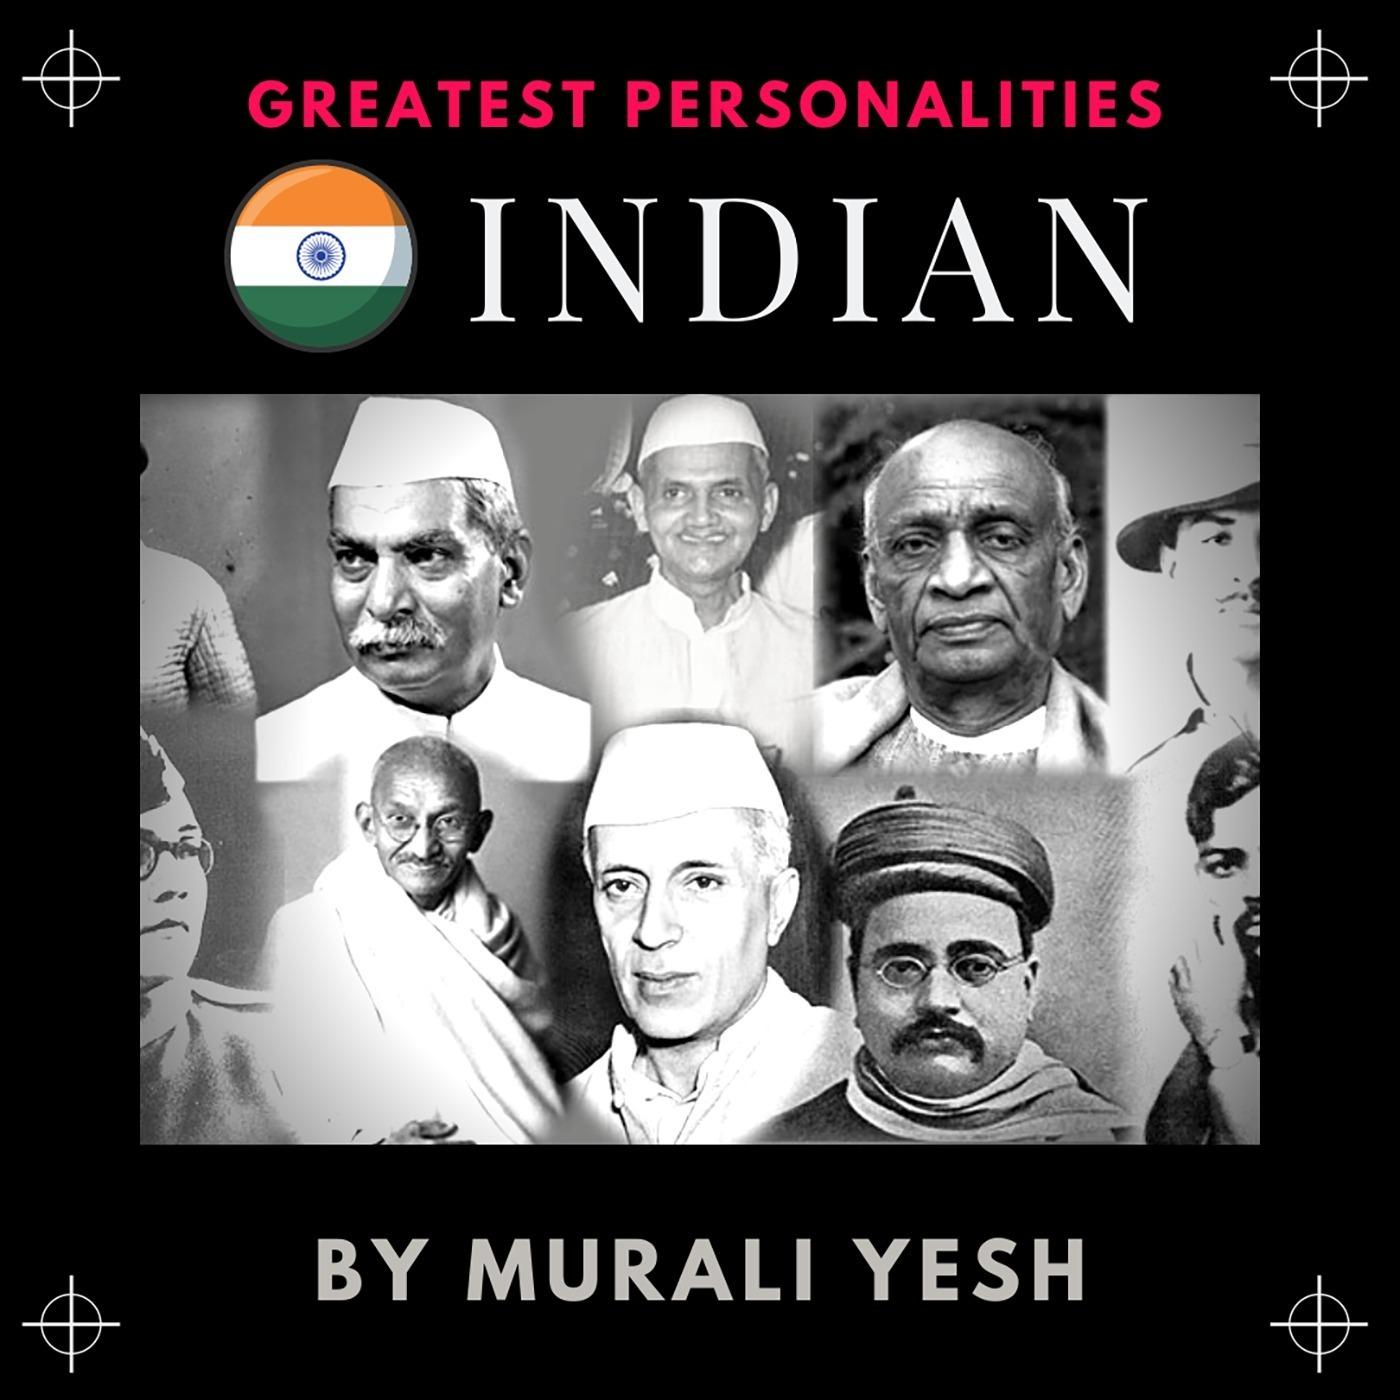 Greatest Personalities of India